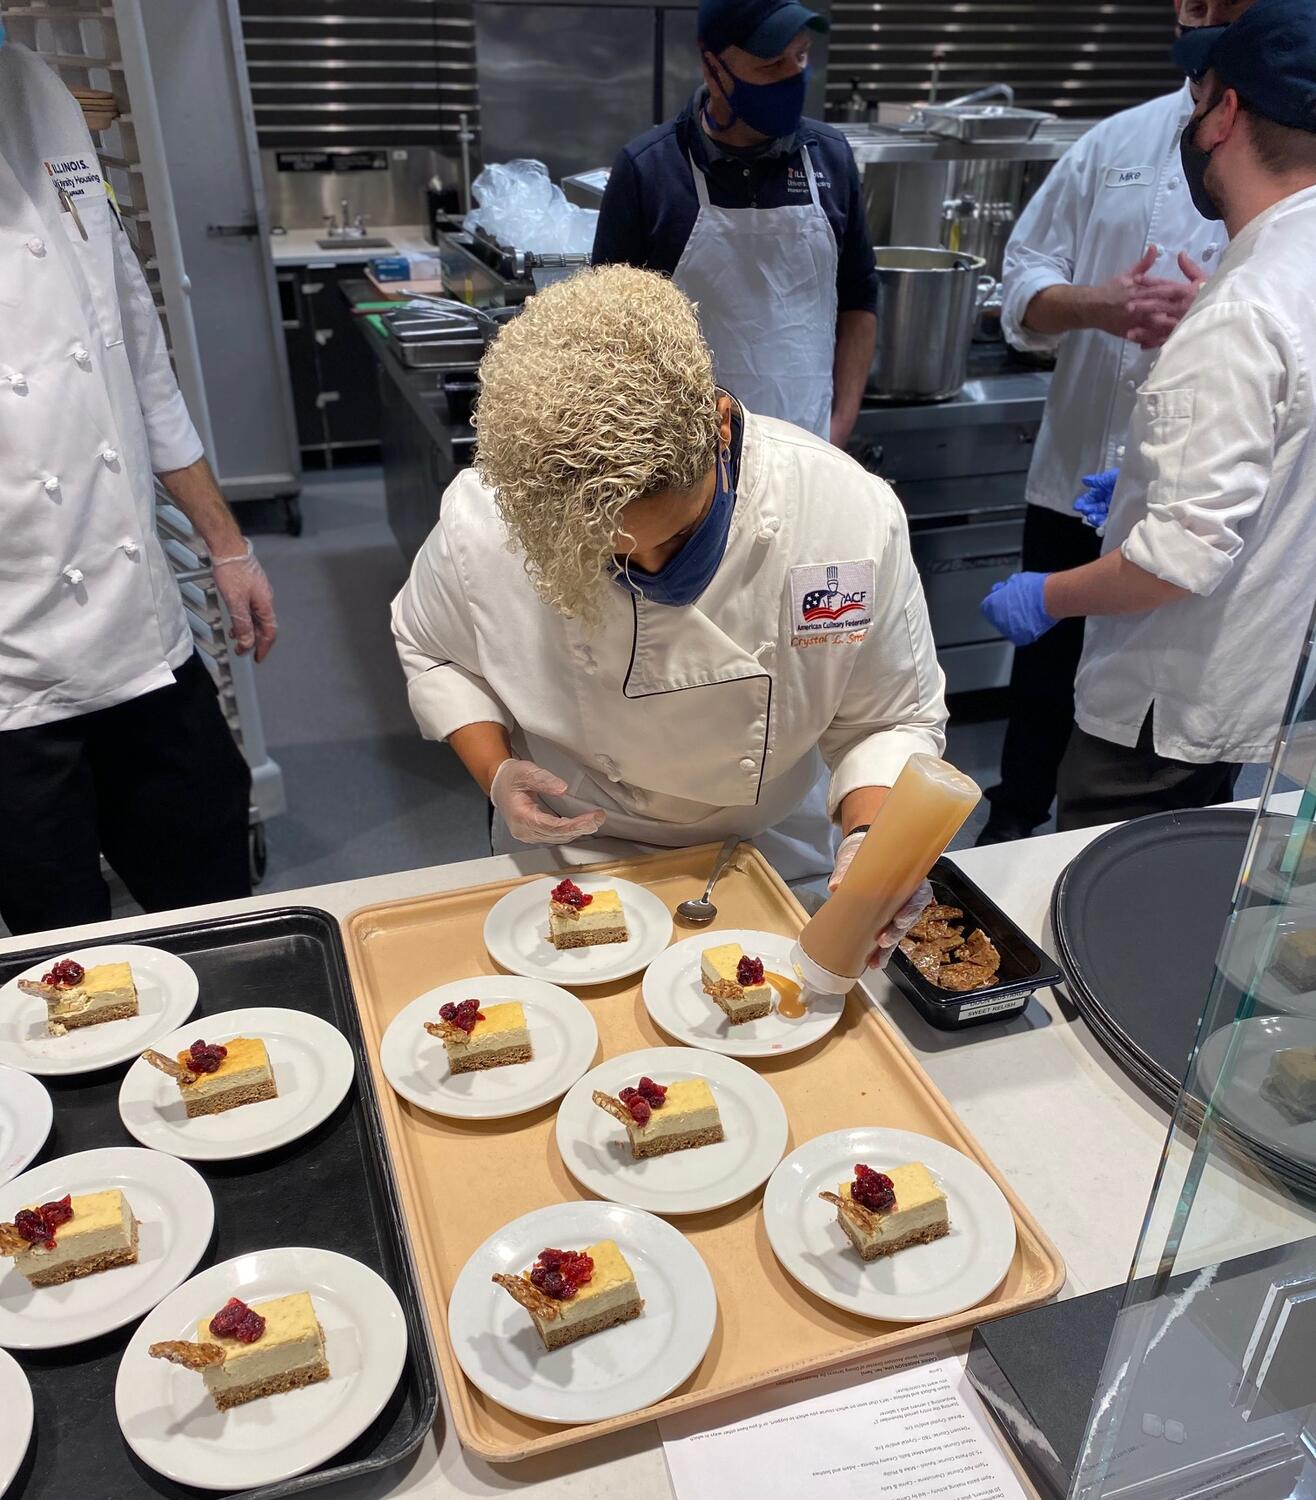 Chef Crystol Smith puts the finishing touches on dessert plates.